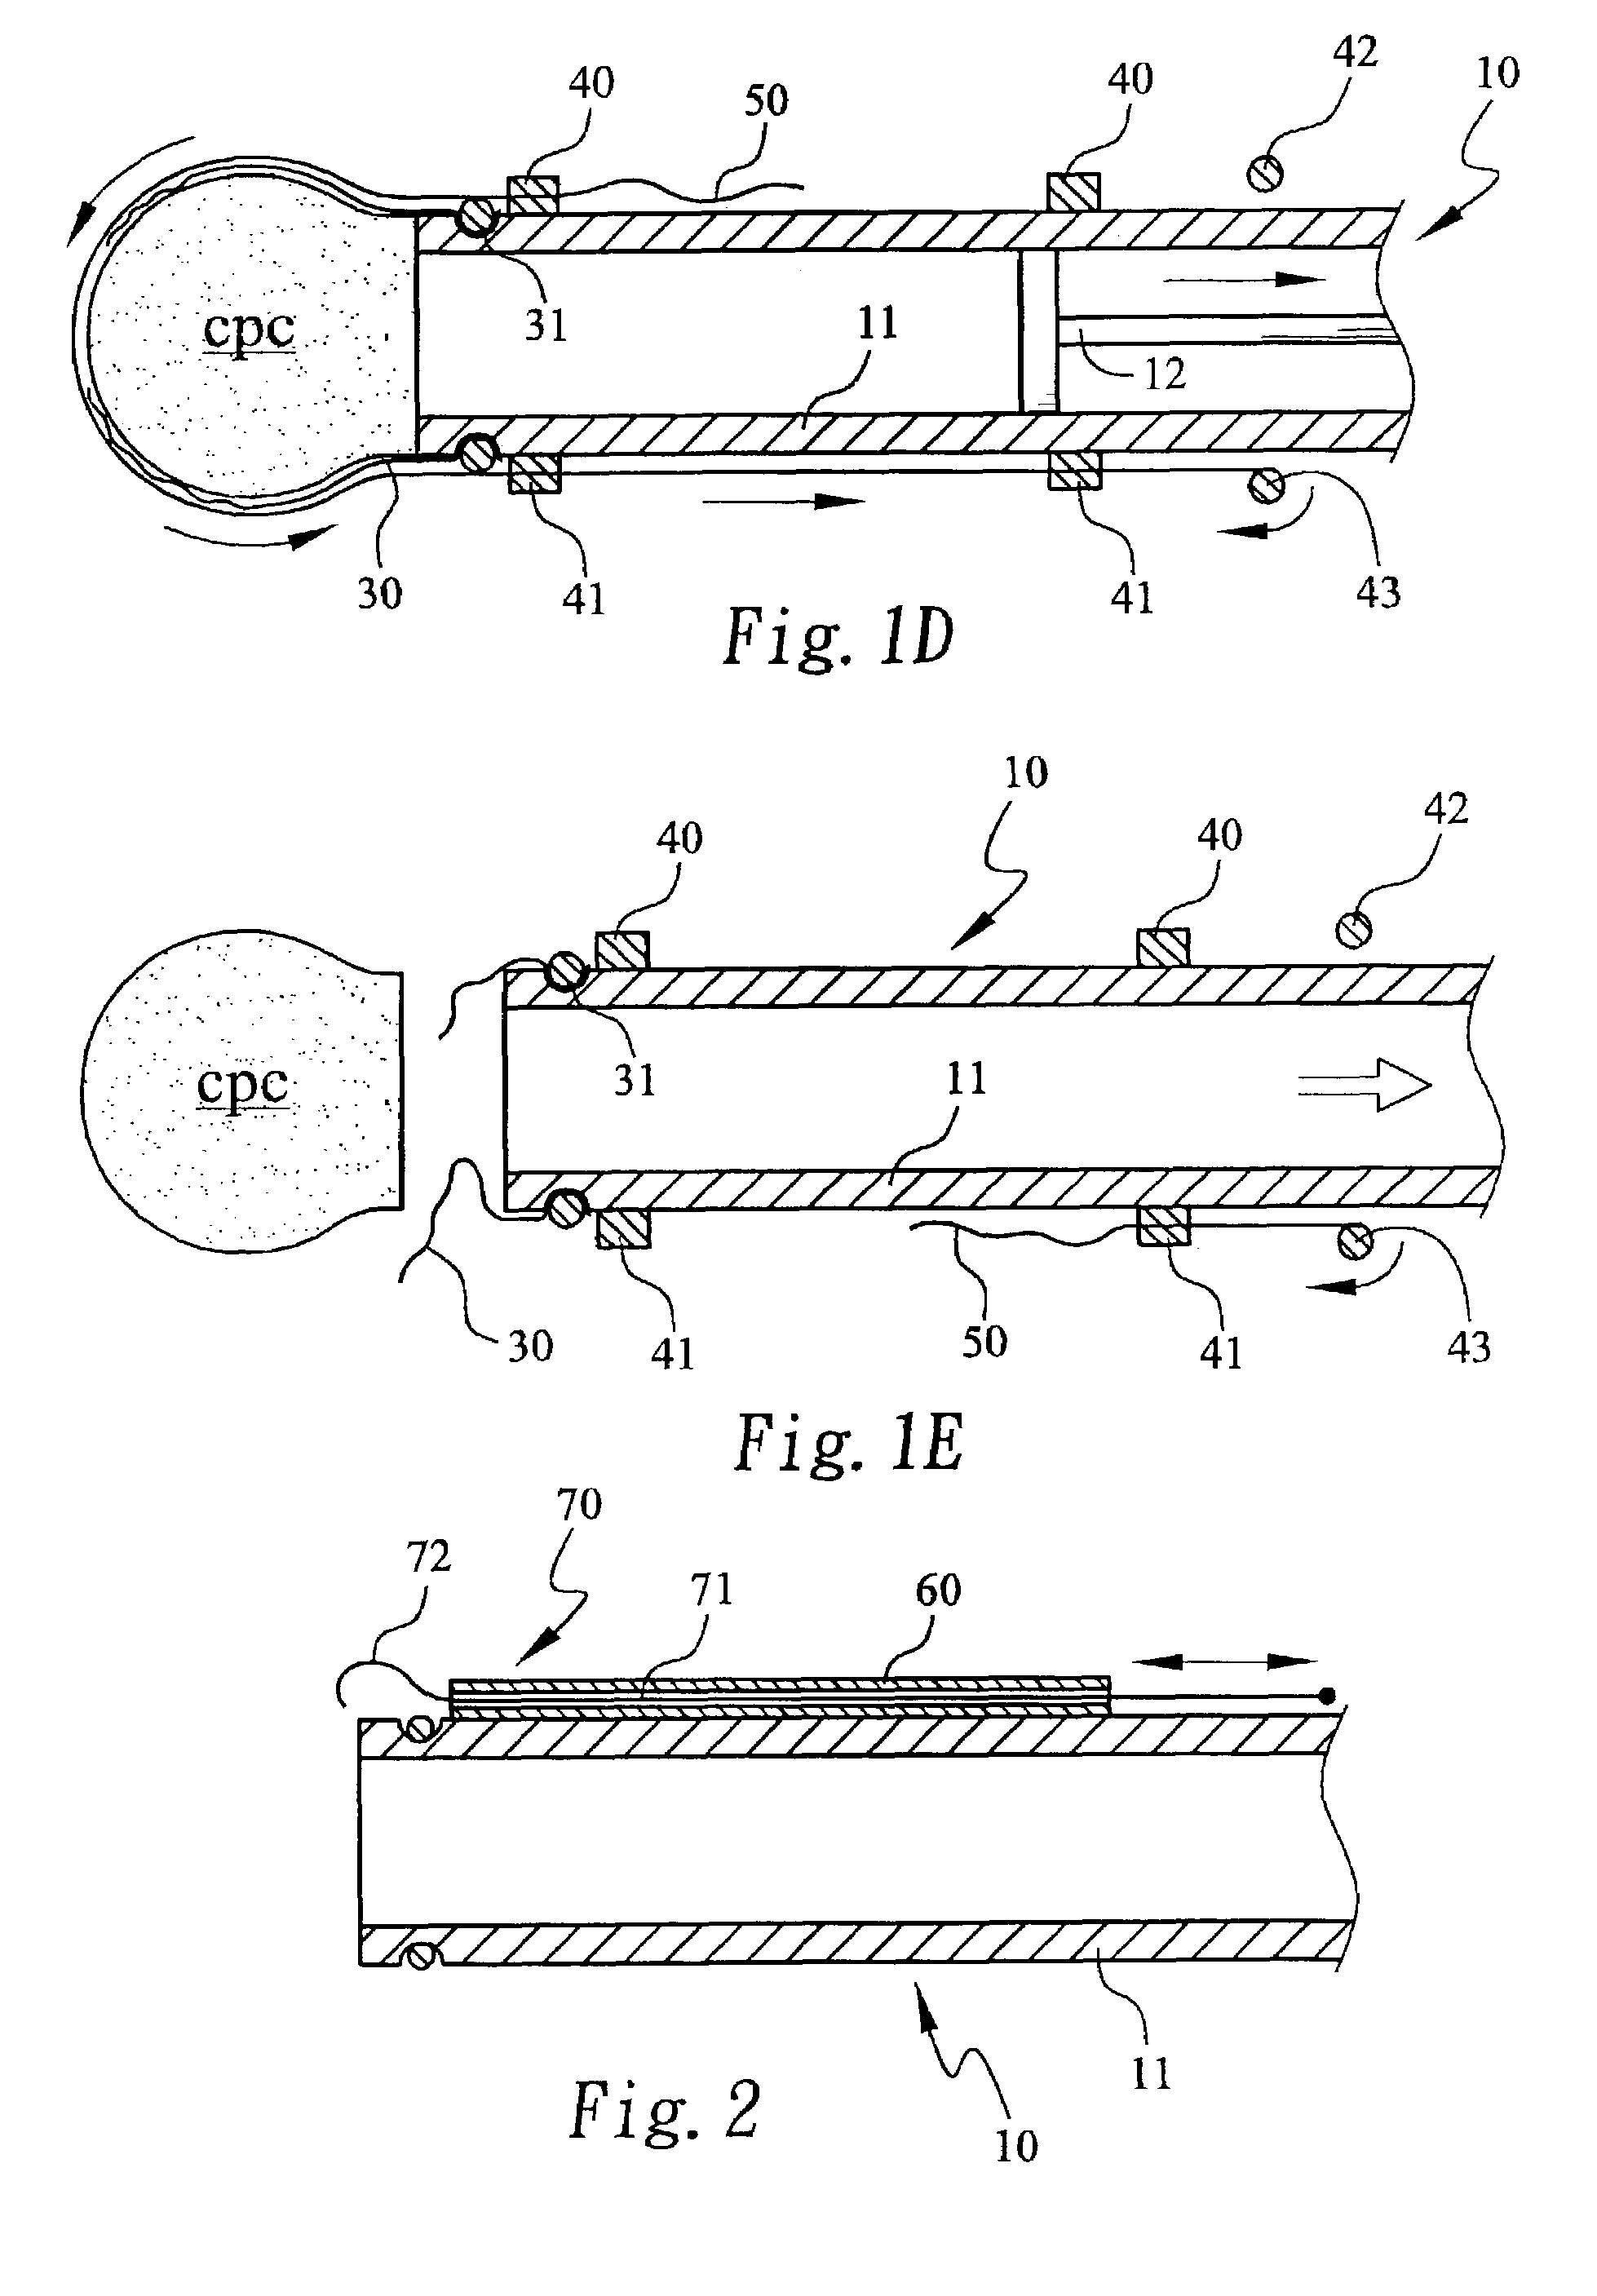 Method and device for forming a hardened cement in a bone cavity